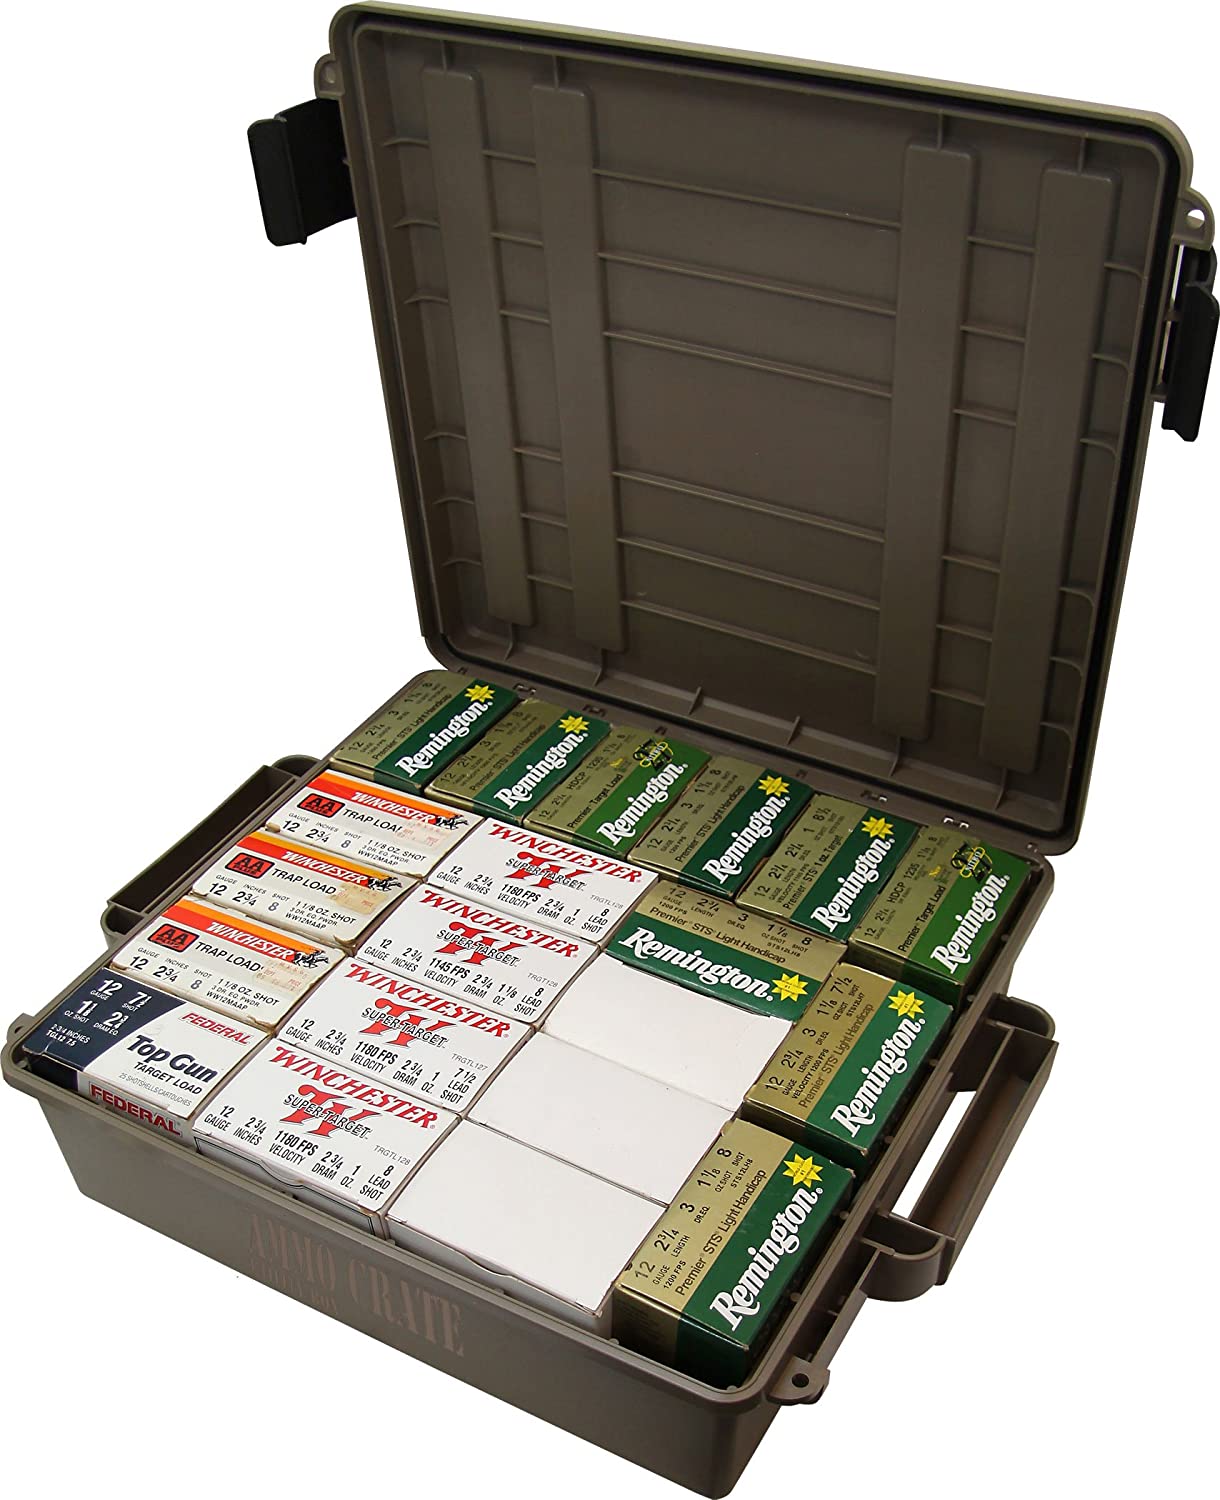 ACR5-72 - Ammo Crate Utility Box - 20 boxes of 12 gauge